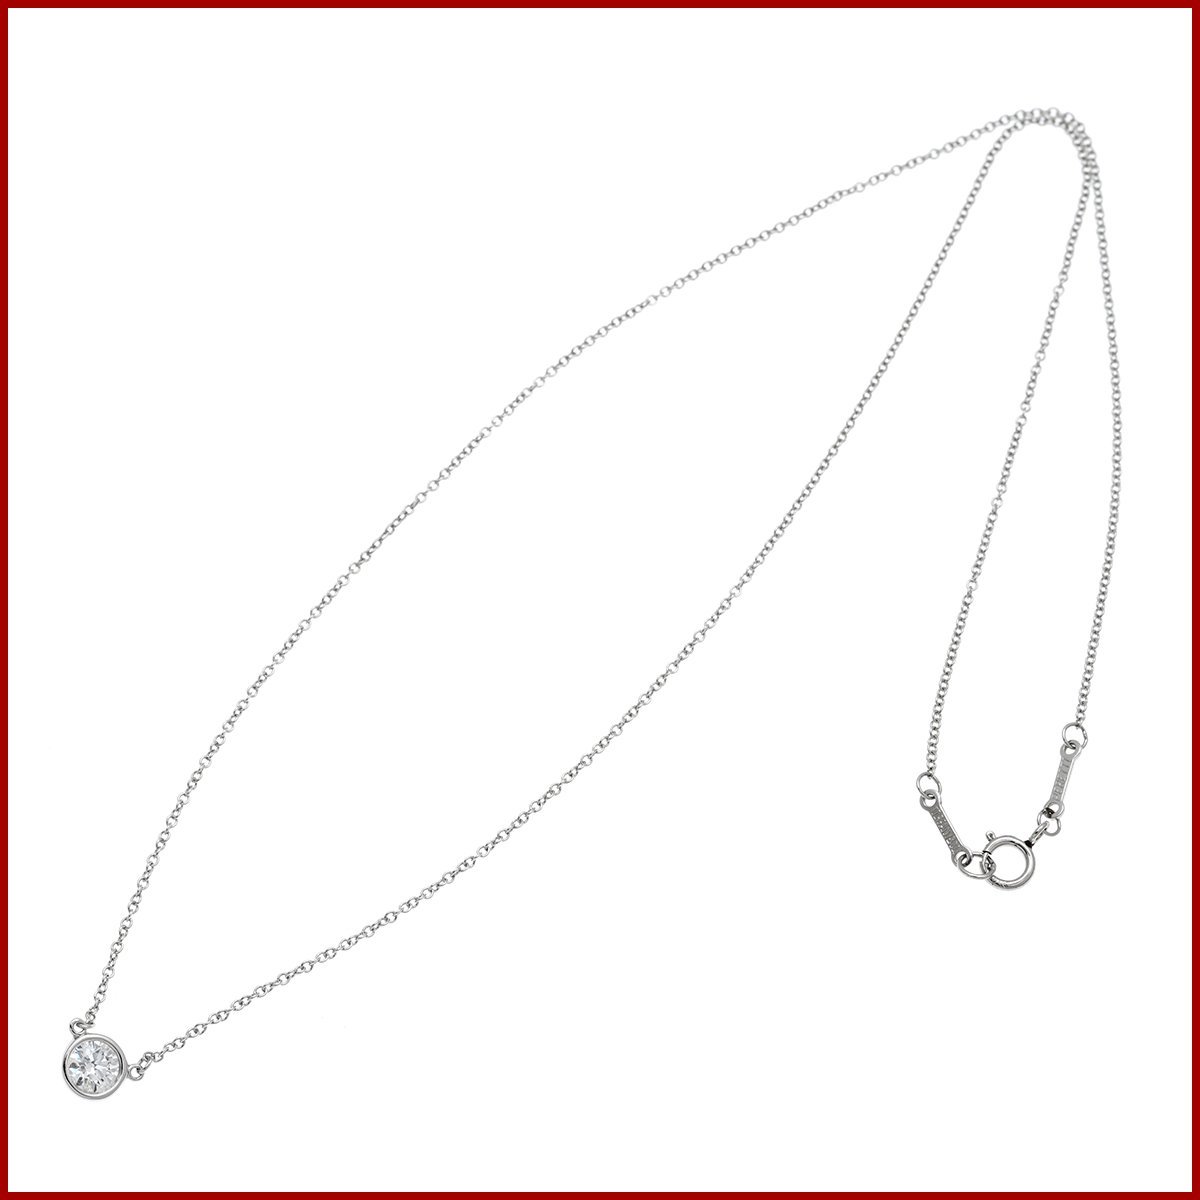  Tiffany visor yard diamond pendant necklace diameter 5.8mm 0.3ct and more Pt950 platinum beautiful goods new goods has been finished serial equipped 